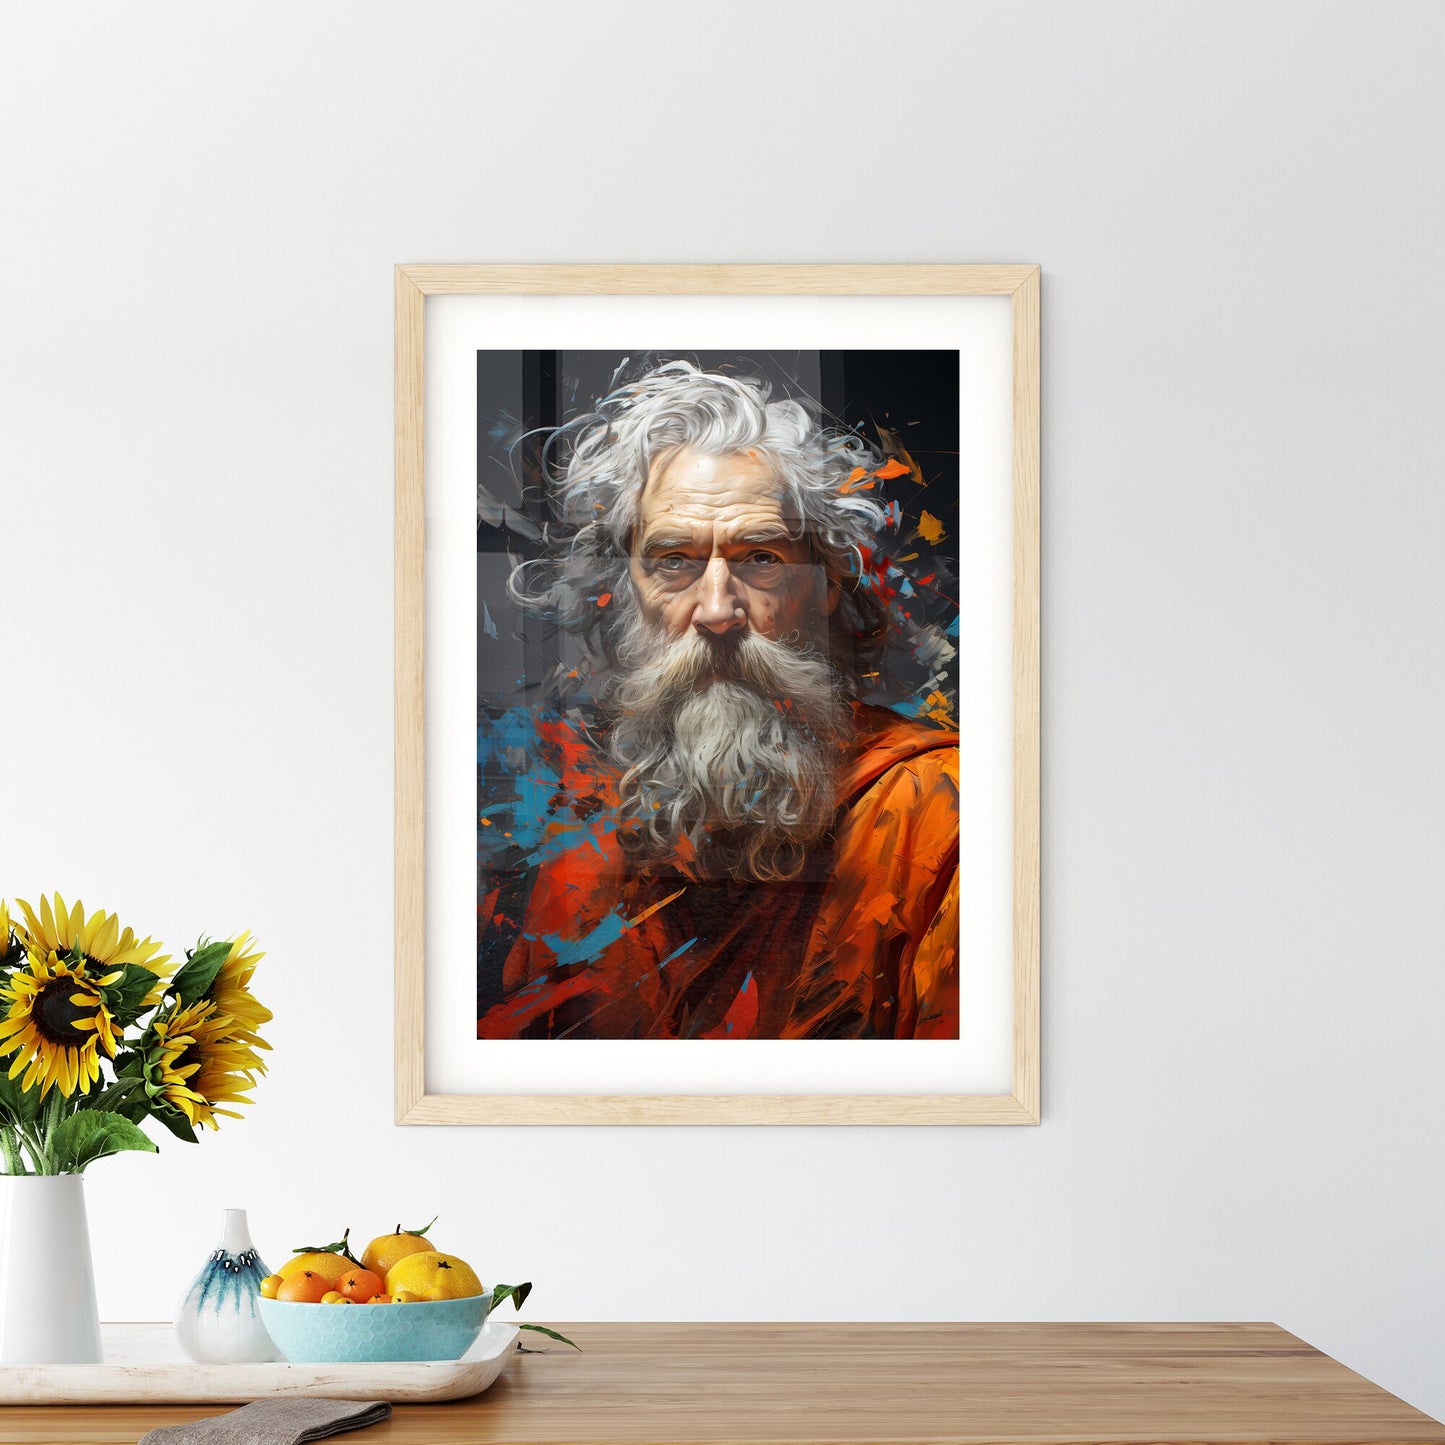 Socrates Greek Philosopher - A Man With A Beard And Mustache Default Title